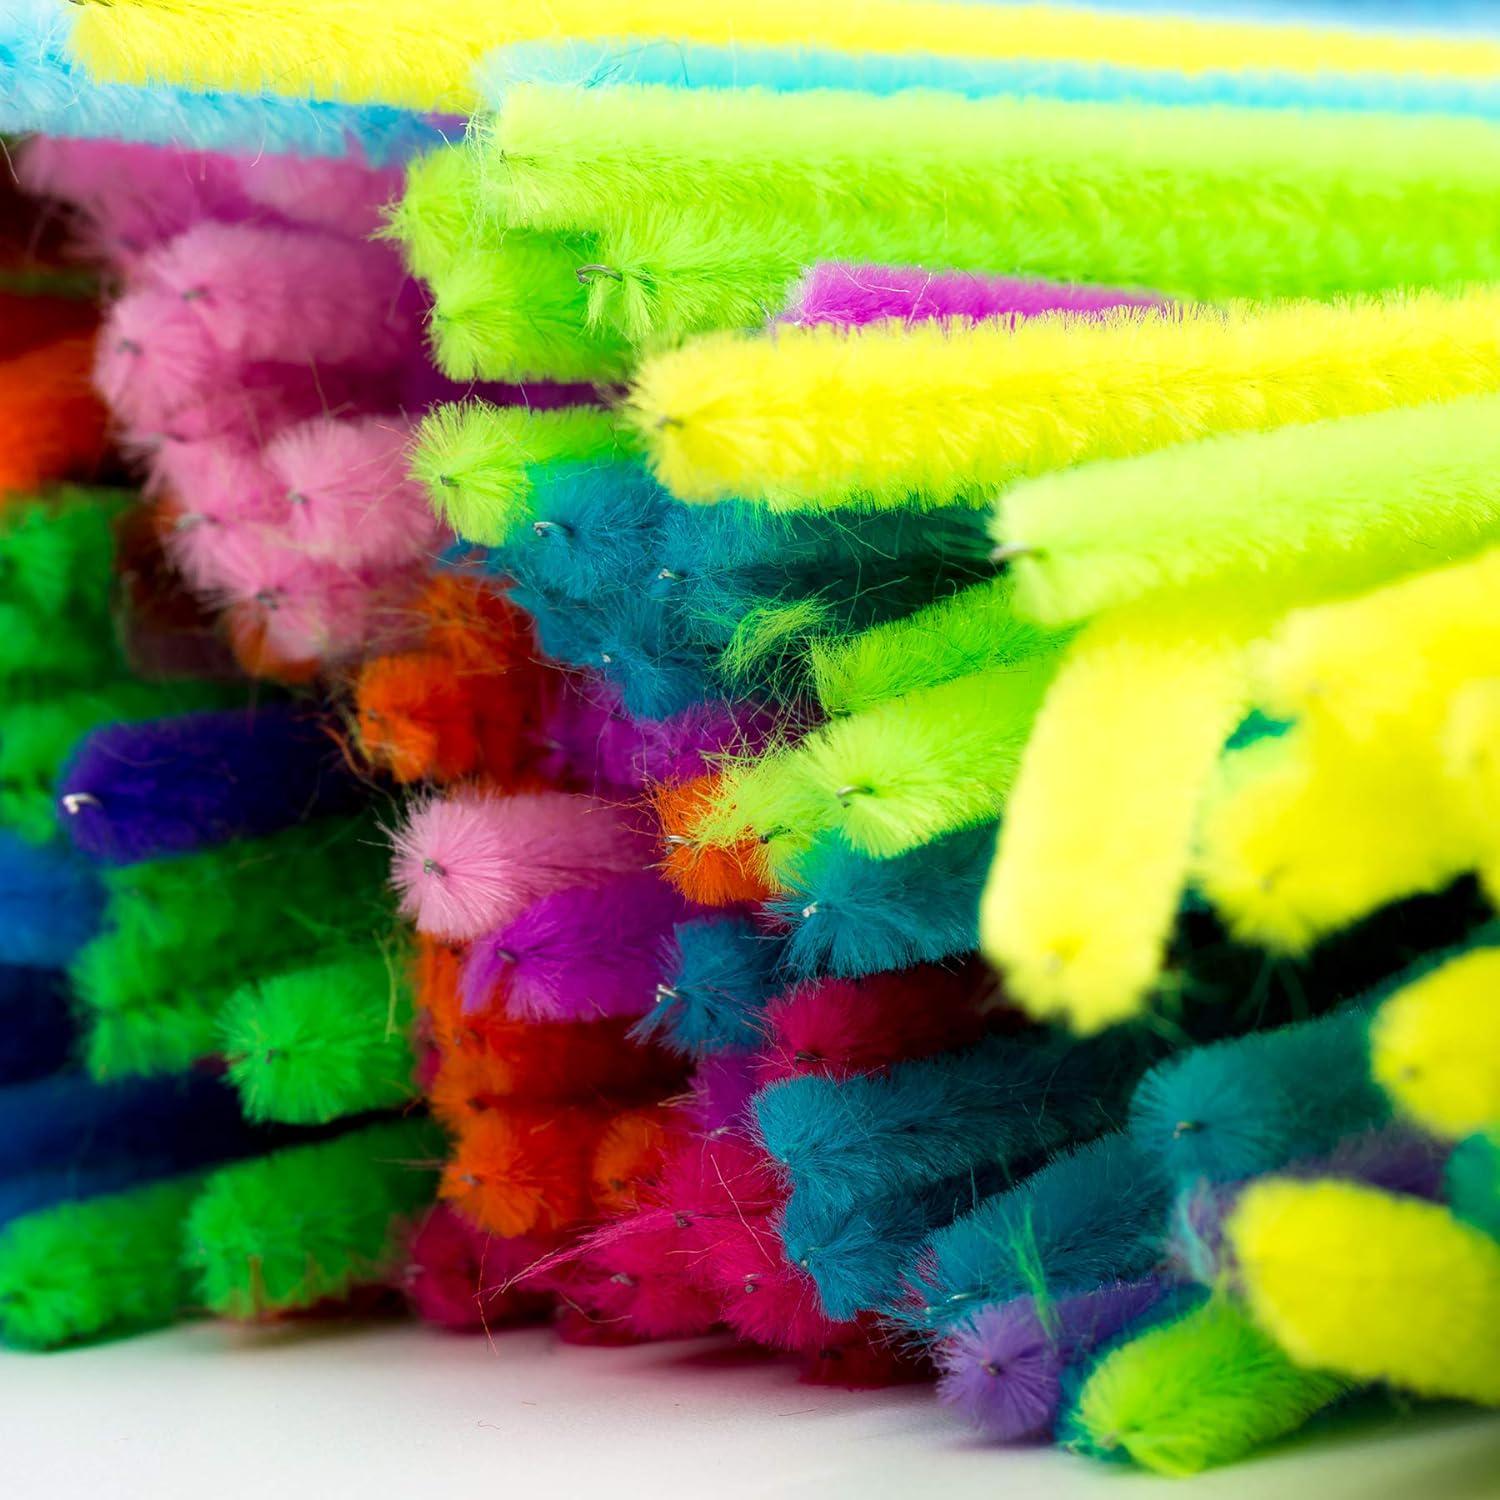 Cuttte 300pcs 10 Colors Pipe Cleaners DIY Art Craft Decorations Chenille Stems Assorted Colors (6 mm x 12 inch)